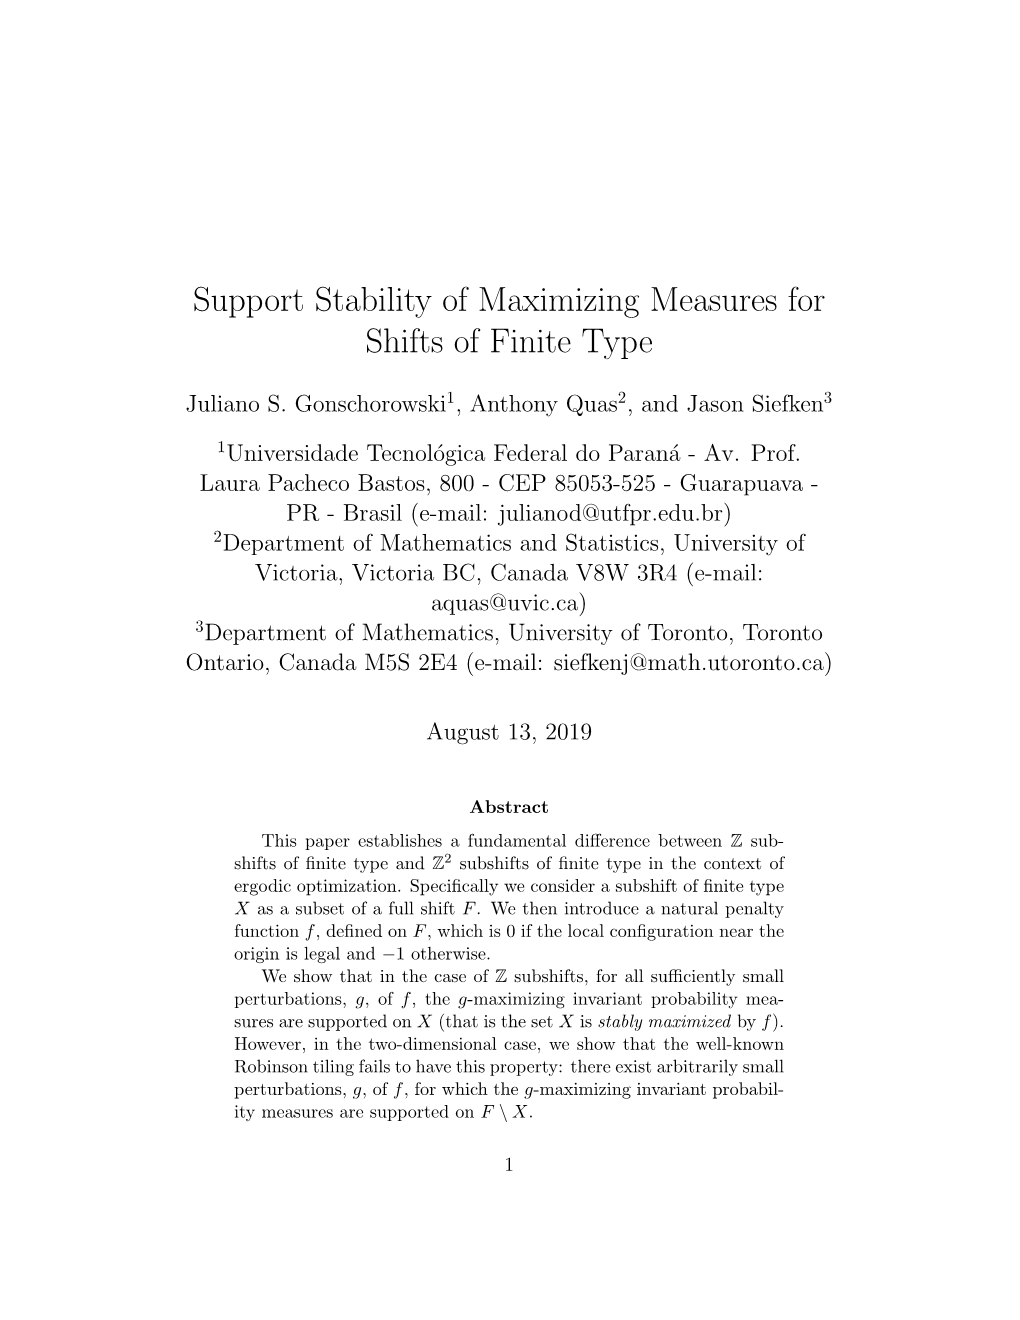 Support Stability of Maximizing Measures for Shifts of Finite Type